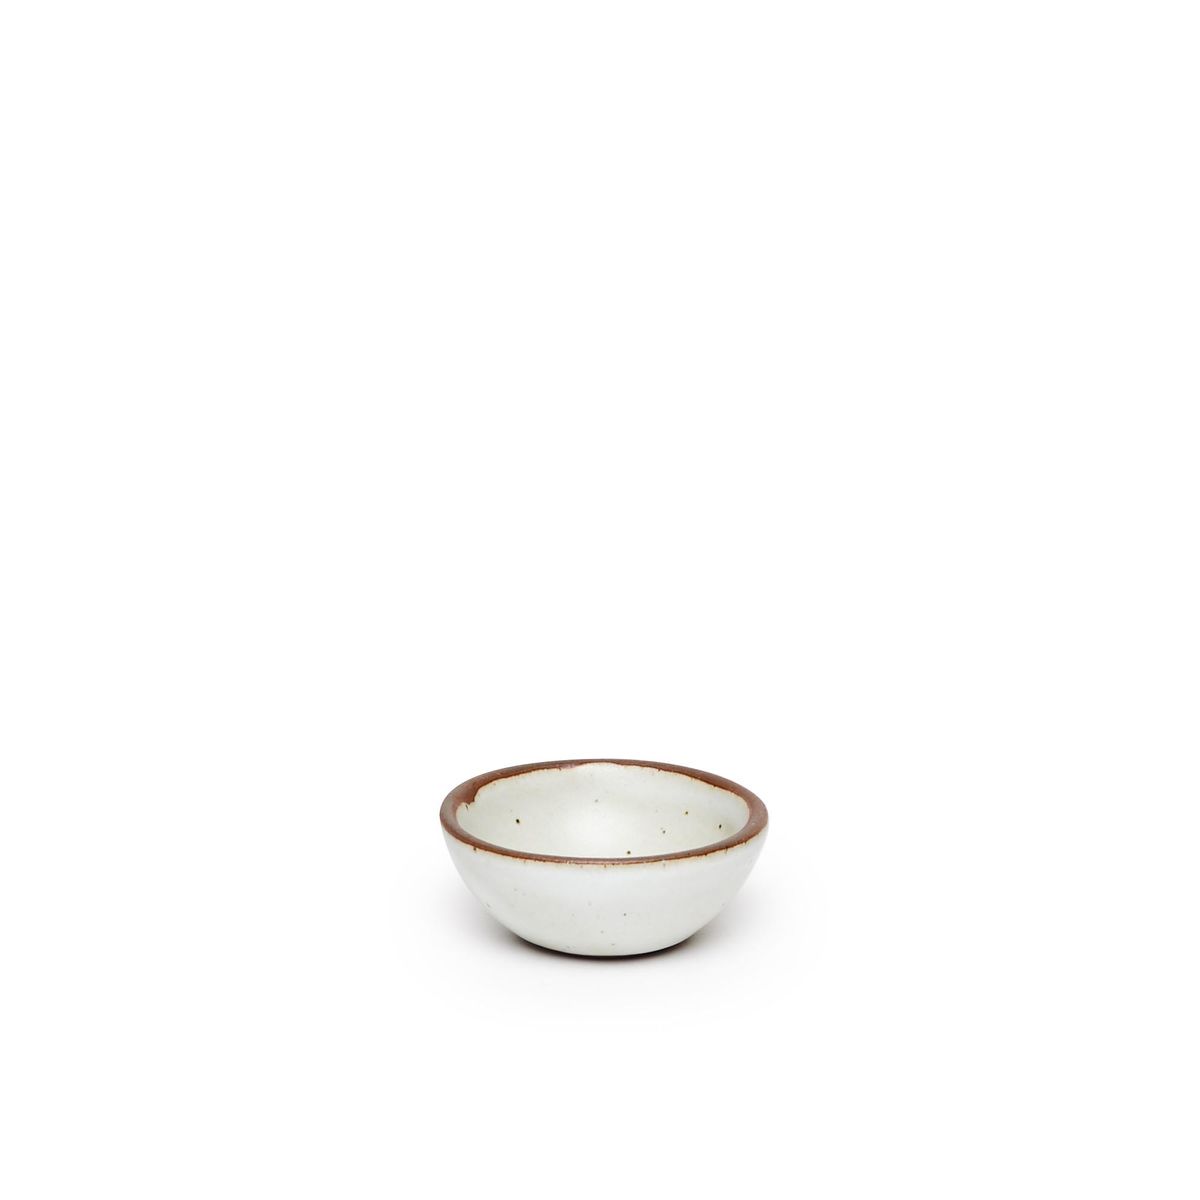 A tiny rounded ceramic bowl in a cool white color featuring iron speckles and an unglazed rim